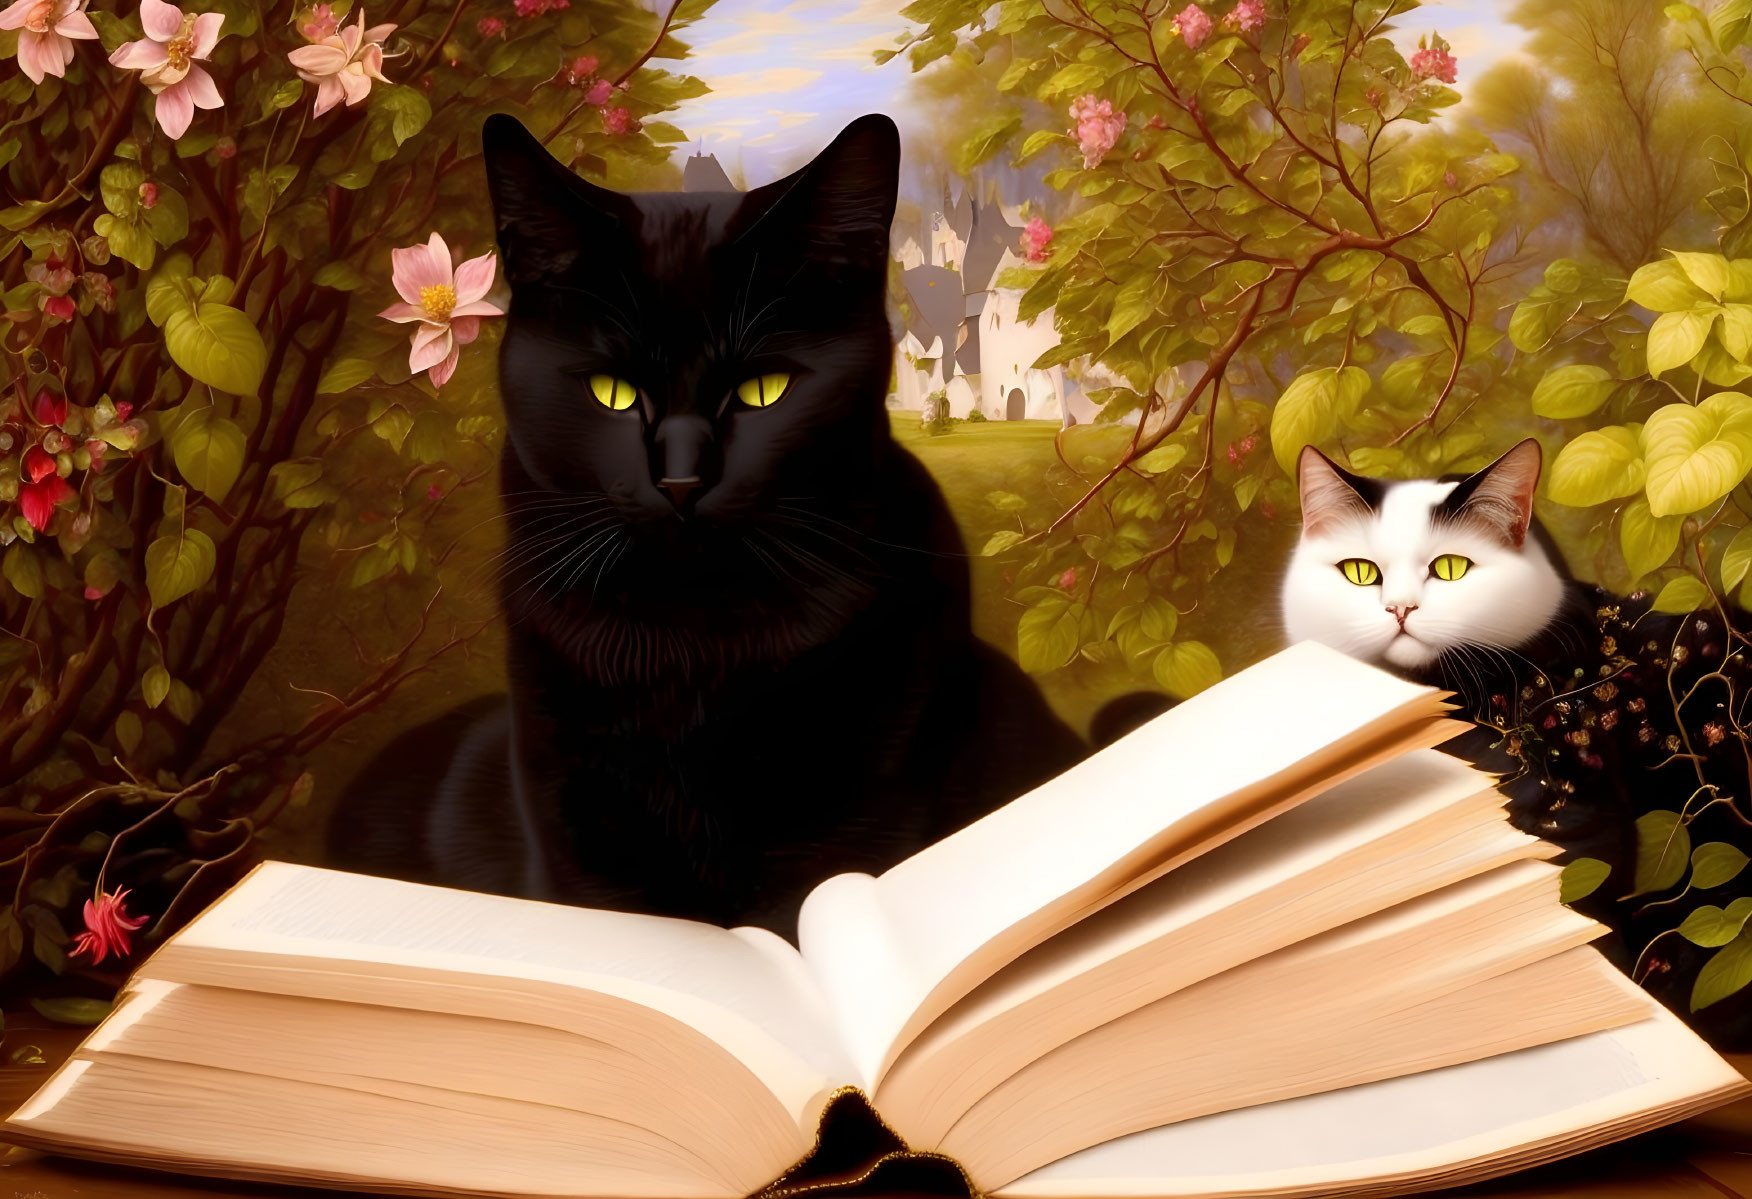 Two cats with open book in garden setting, flowers & castle in background